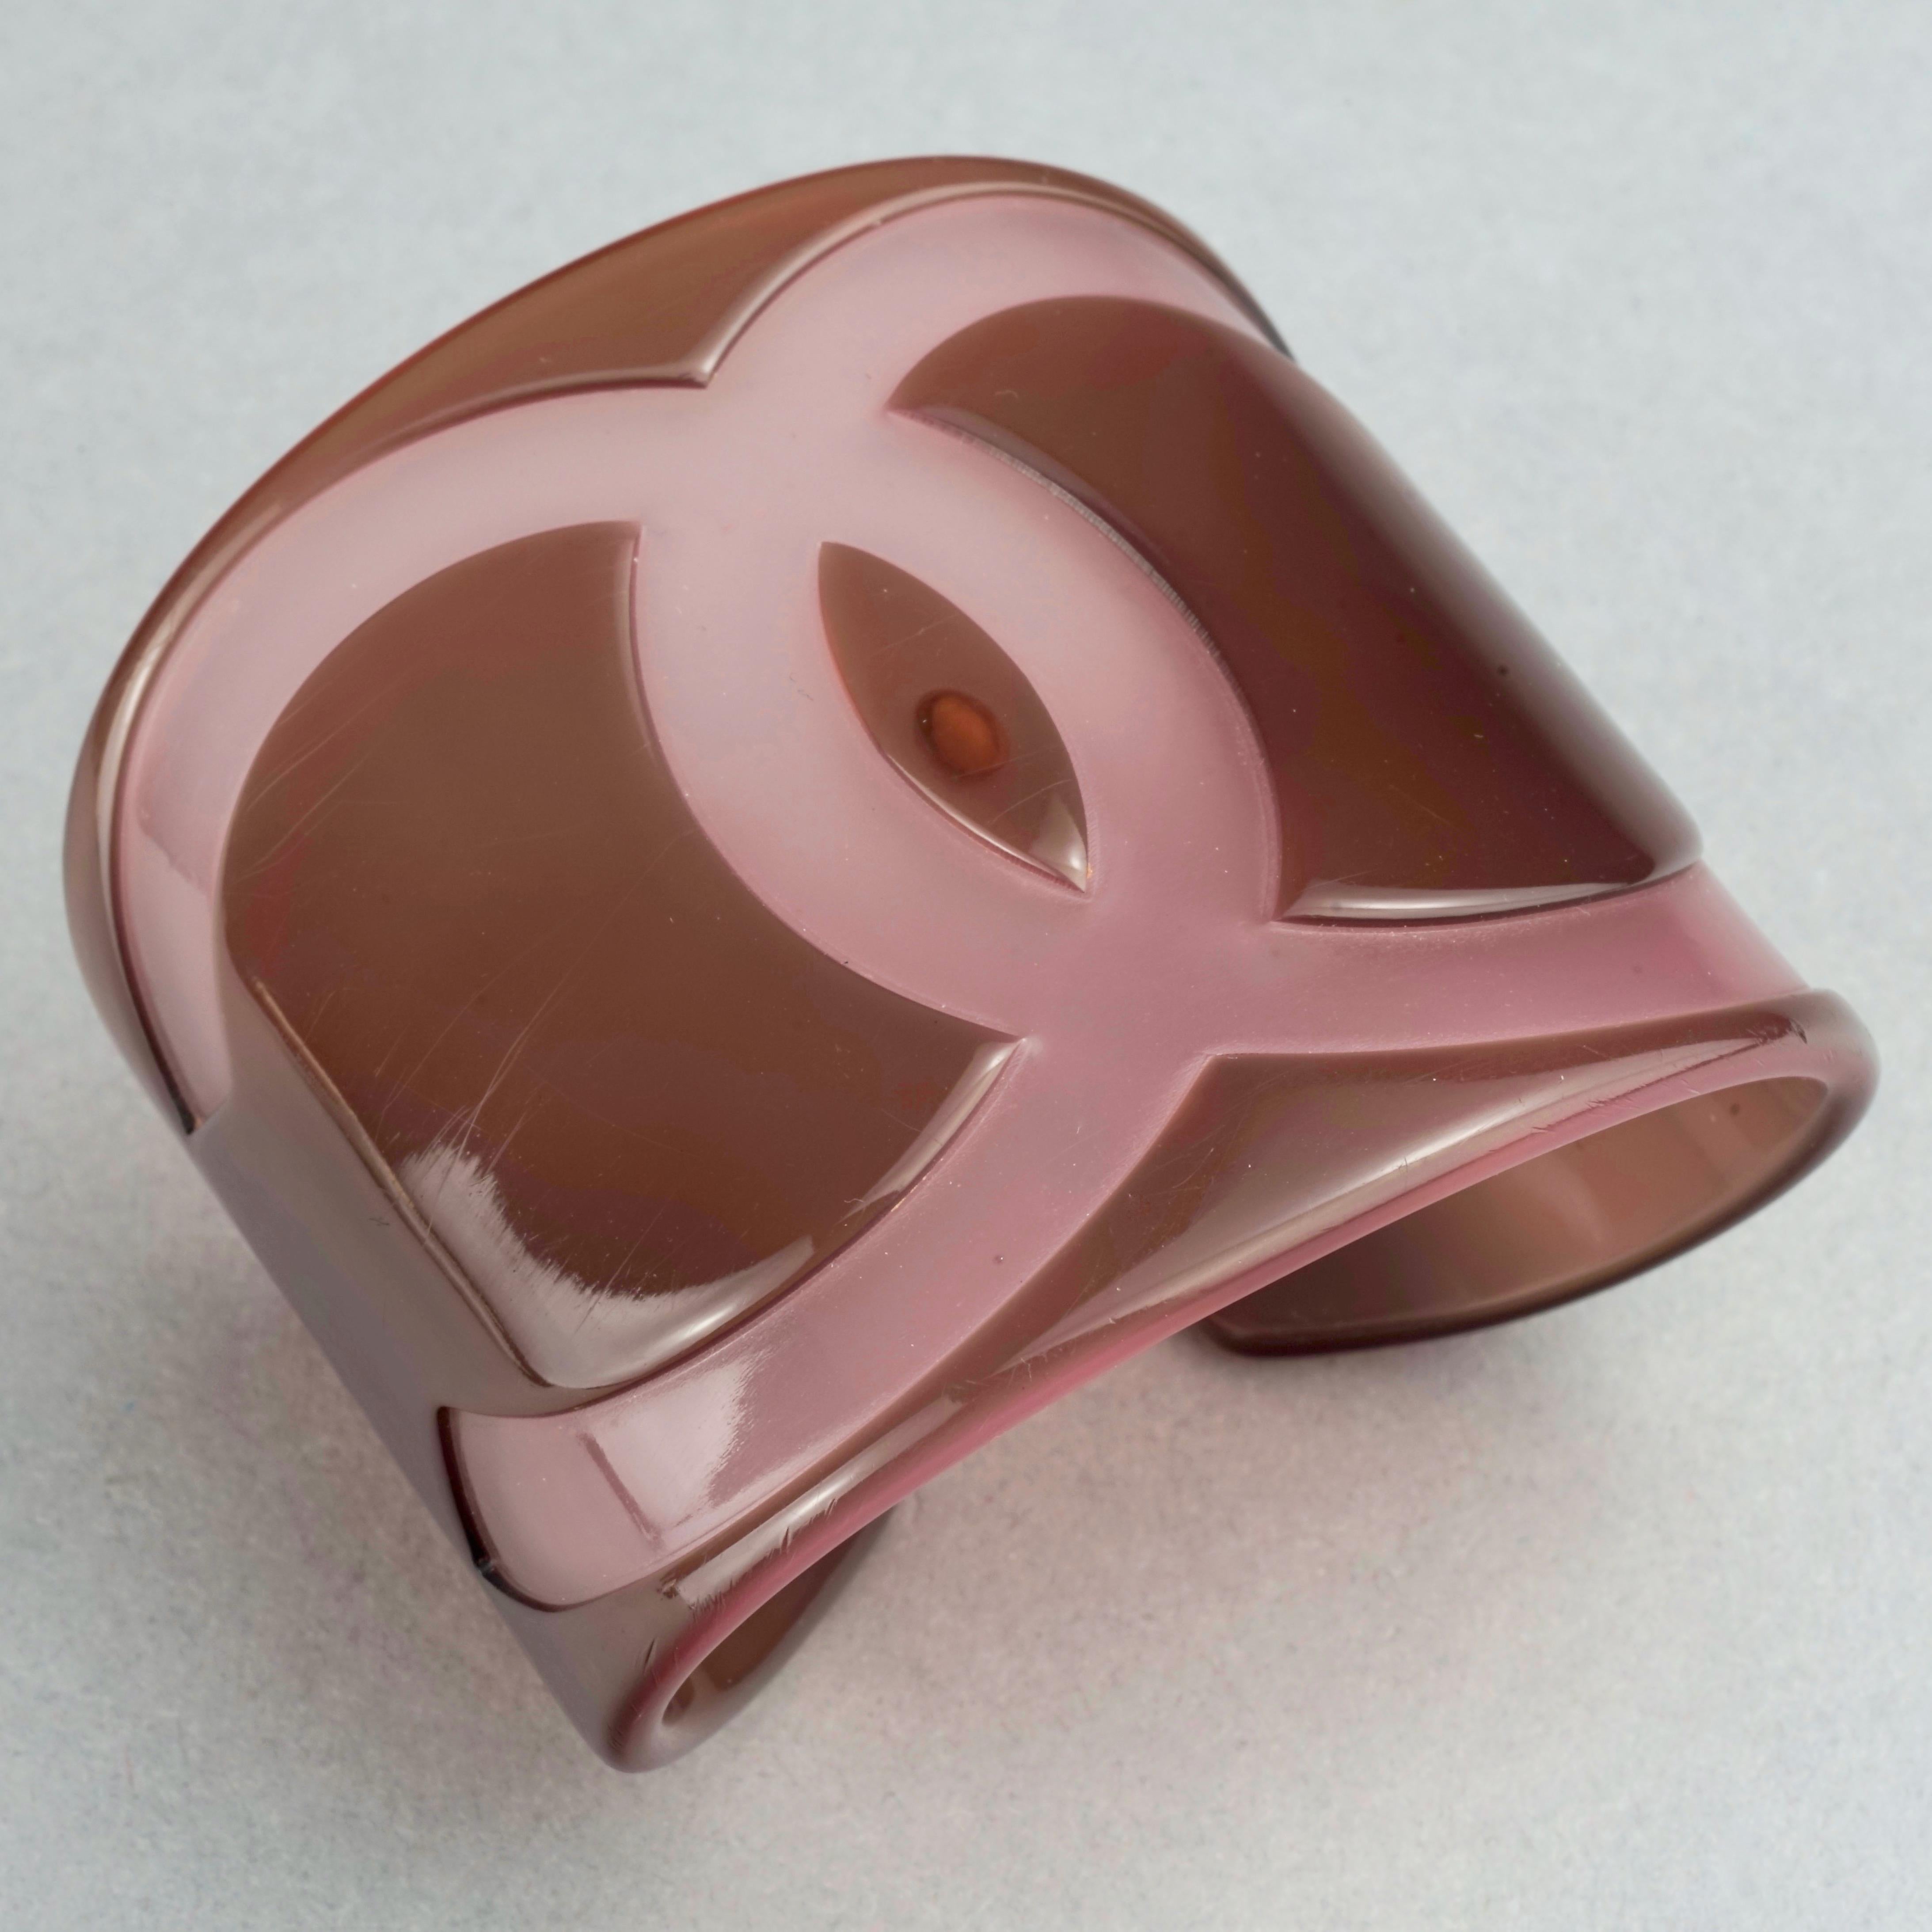 2001 CHANEL CC Logo Perspex Wide Cuff Bracelet	

Measurements:
Height: 2.16 inches (5.5 cm)
Circumference: 5.71 inches (14.5 cm) including normal opening
Opening: 0.6 inch to 0.75 inch (1.5 cm to 1.9 cm)
Inner Diameter: 2.16 inches X 1.50 inches